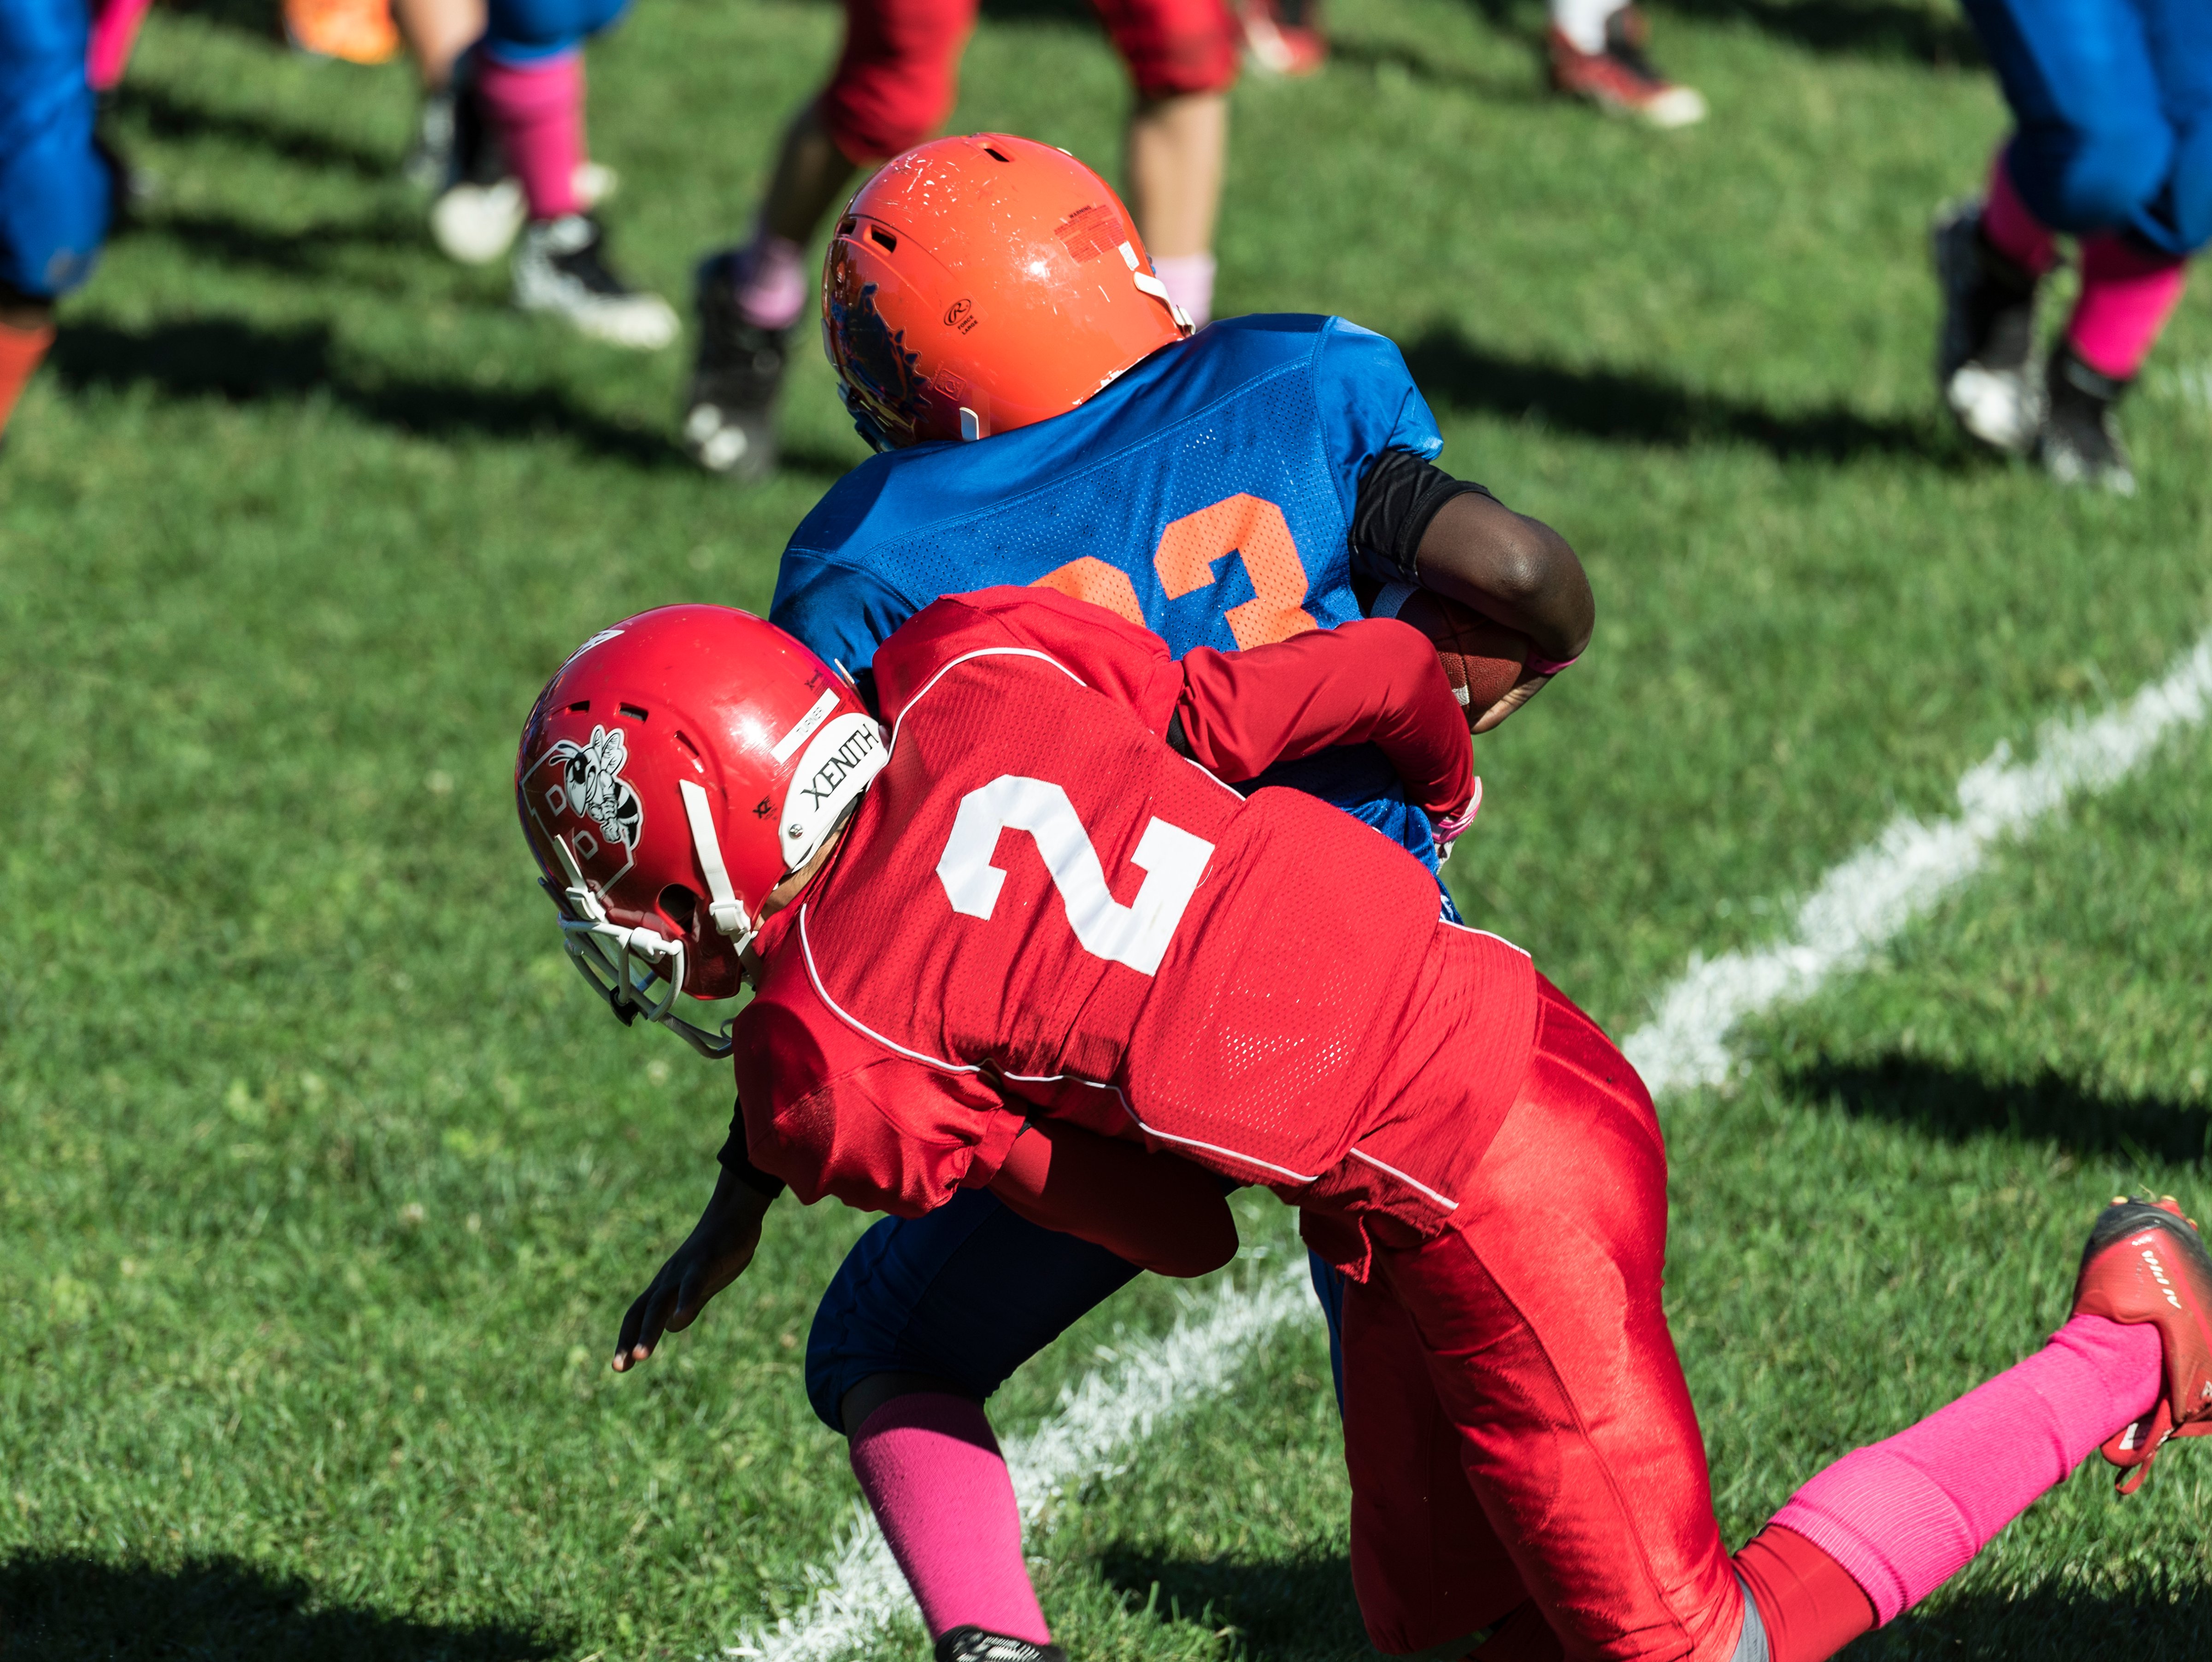 Making a tackle during a Pop Warner football game